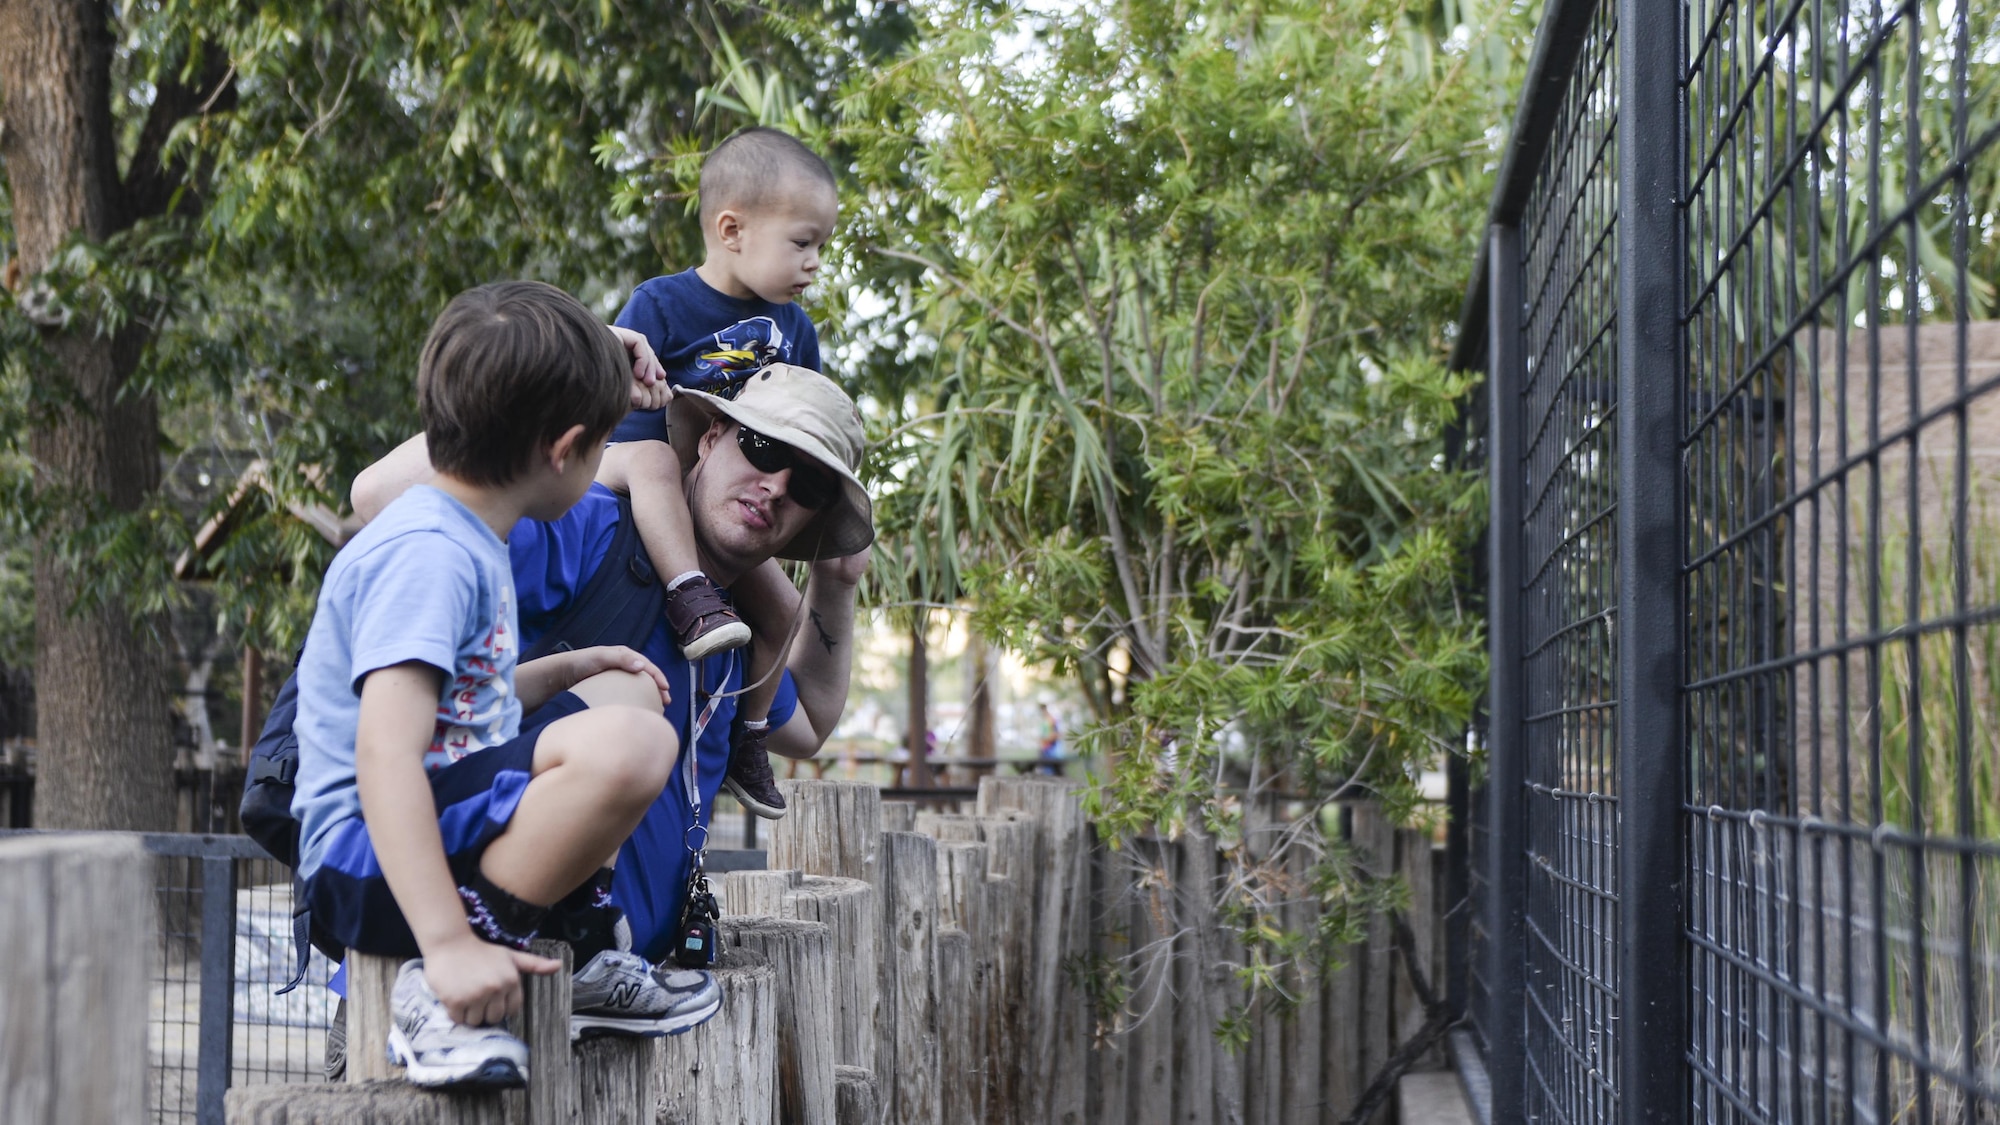 A father talks to his son while viewing an enclosure at the annual Zoo After Hours event at Alameda Park Zoo in Alamogordo, N.M. on Sept. 24, 2016. Zoo After Hours is a family-fun event that promotes family education. (U.S. Air Force photo by Airman 1st Class Alexis P. Docherty) 